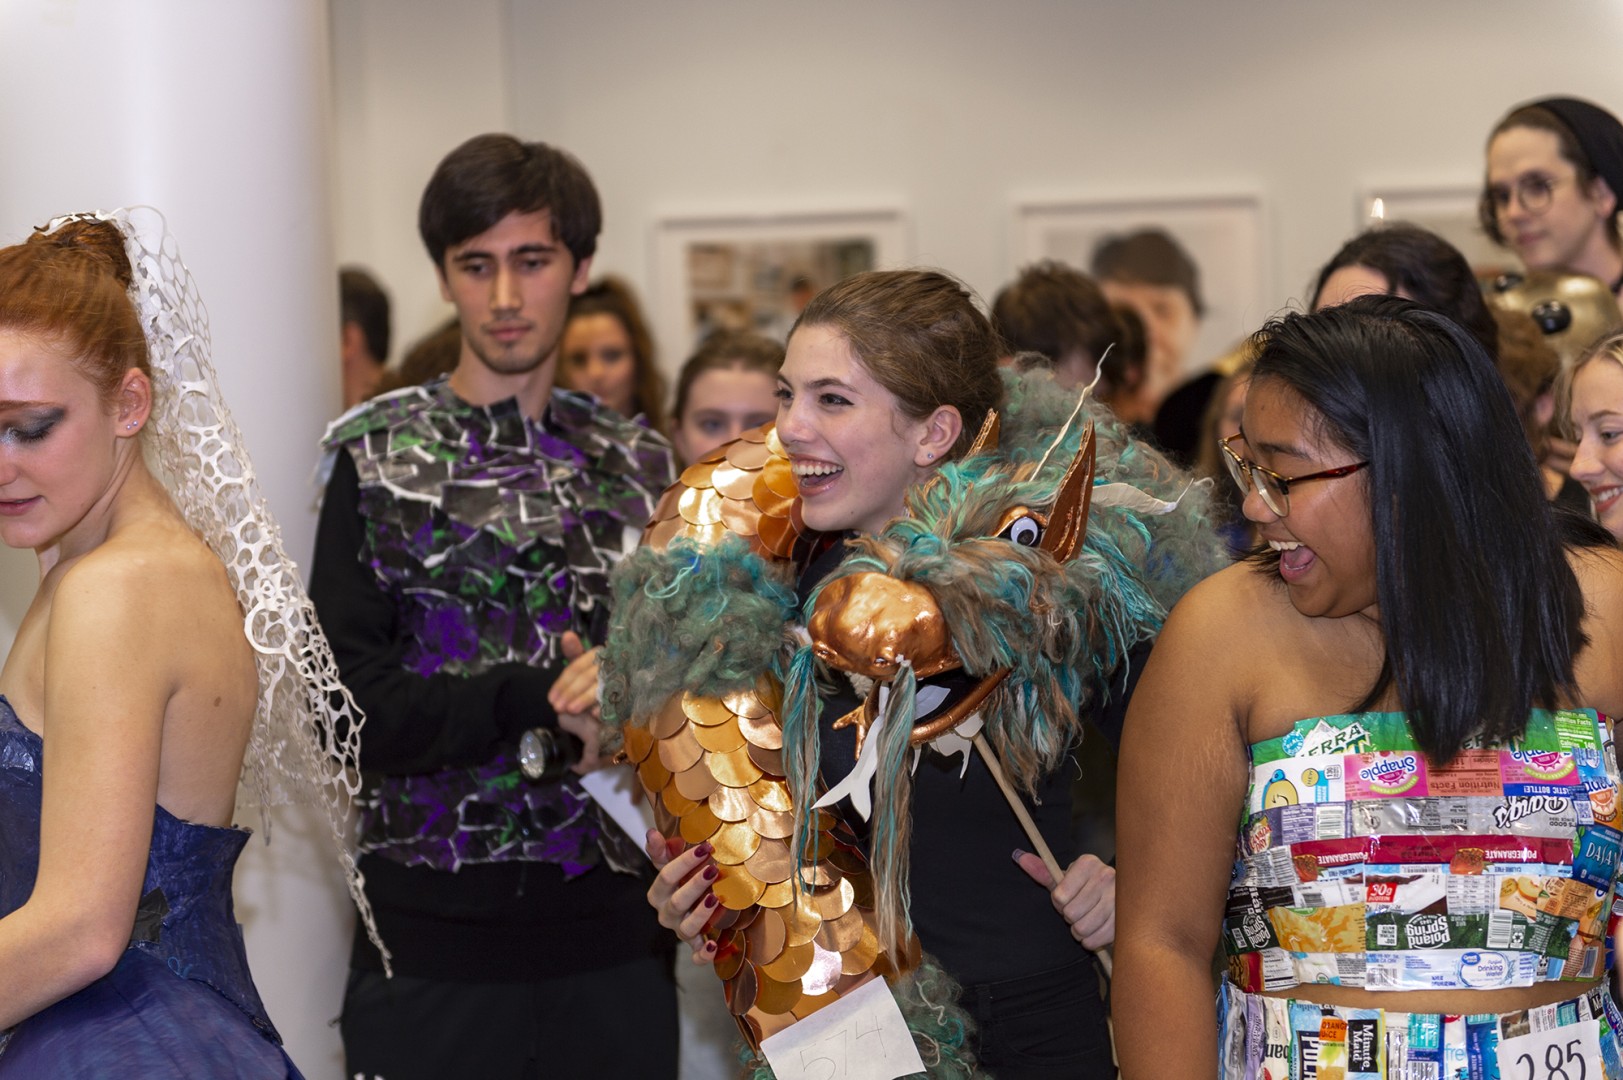 Students don wearable sculpture during a reception event.